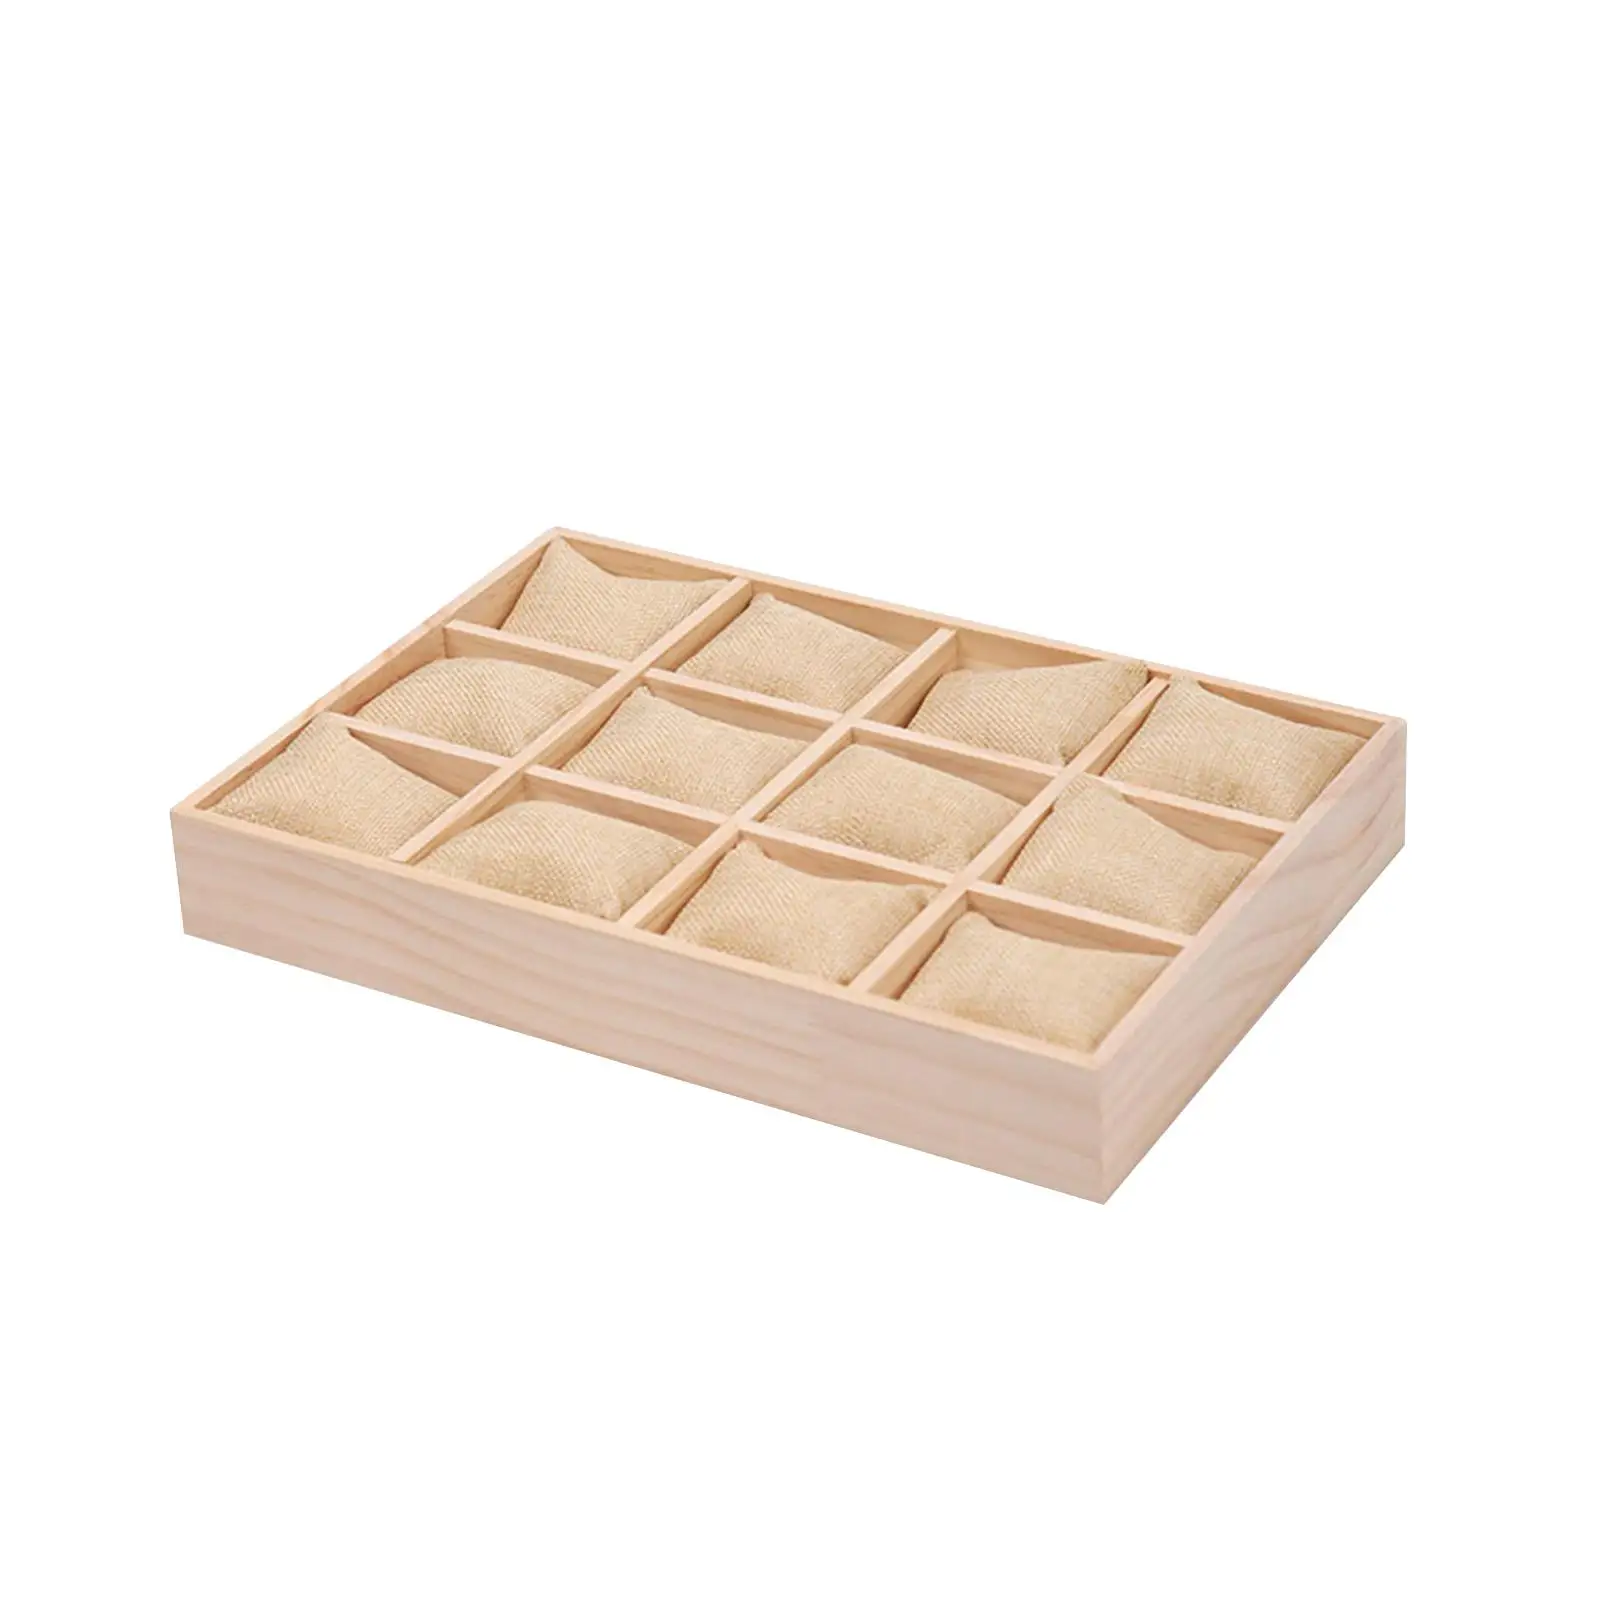 Watch Tray Storage Case Stackable Wood Showcase Watch Holder 12 Grids Watch Pillows Tray for Countertop